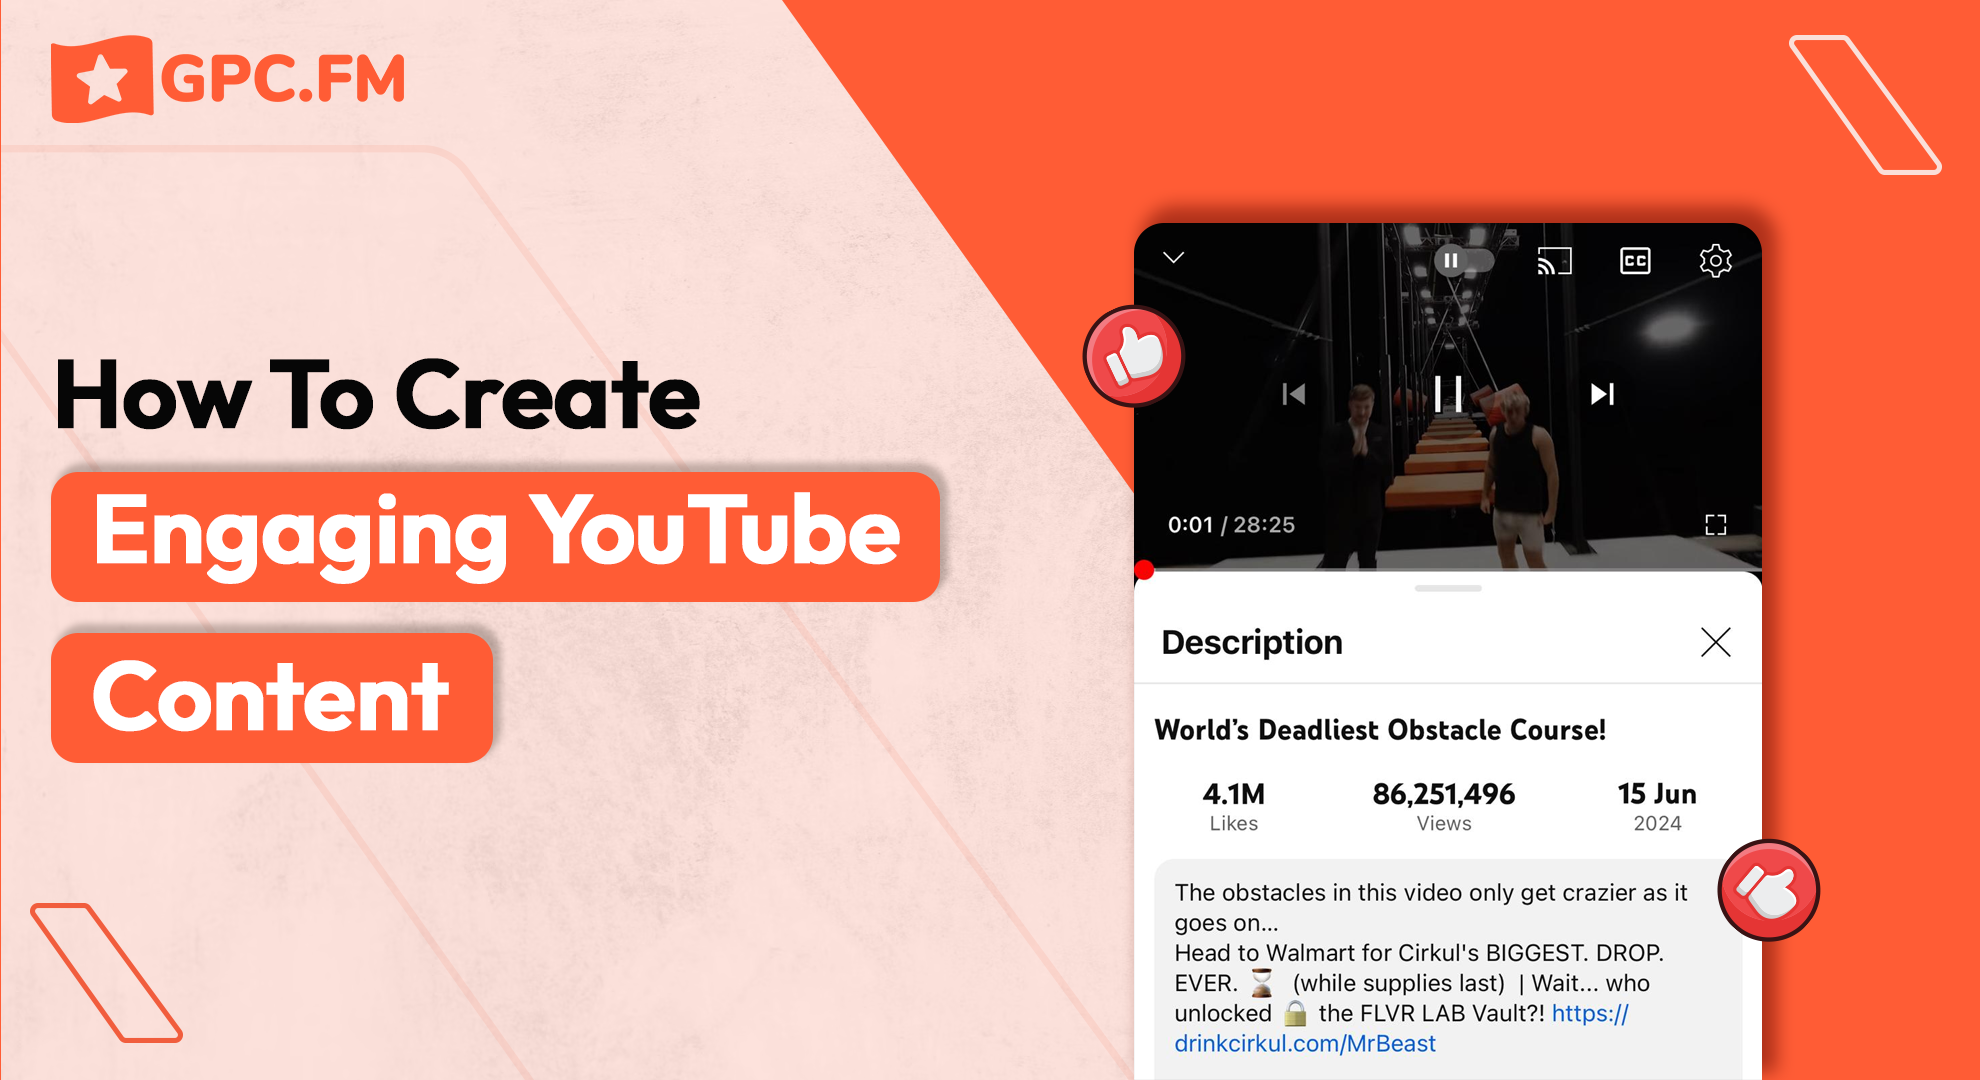 How To Create Engaging YouTube Content